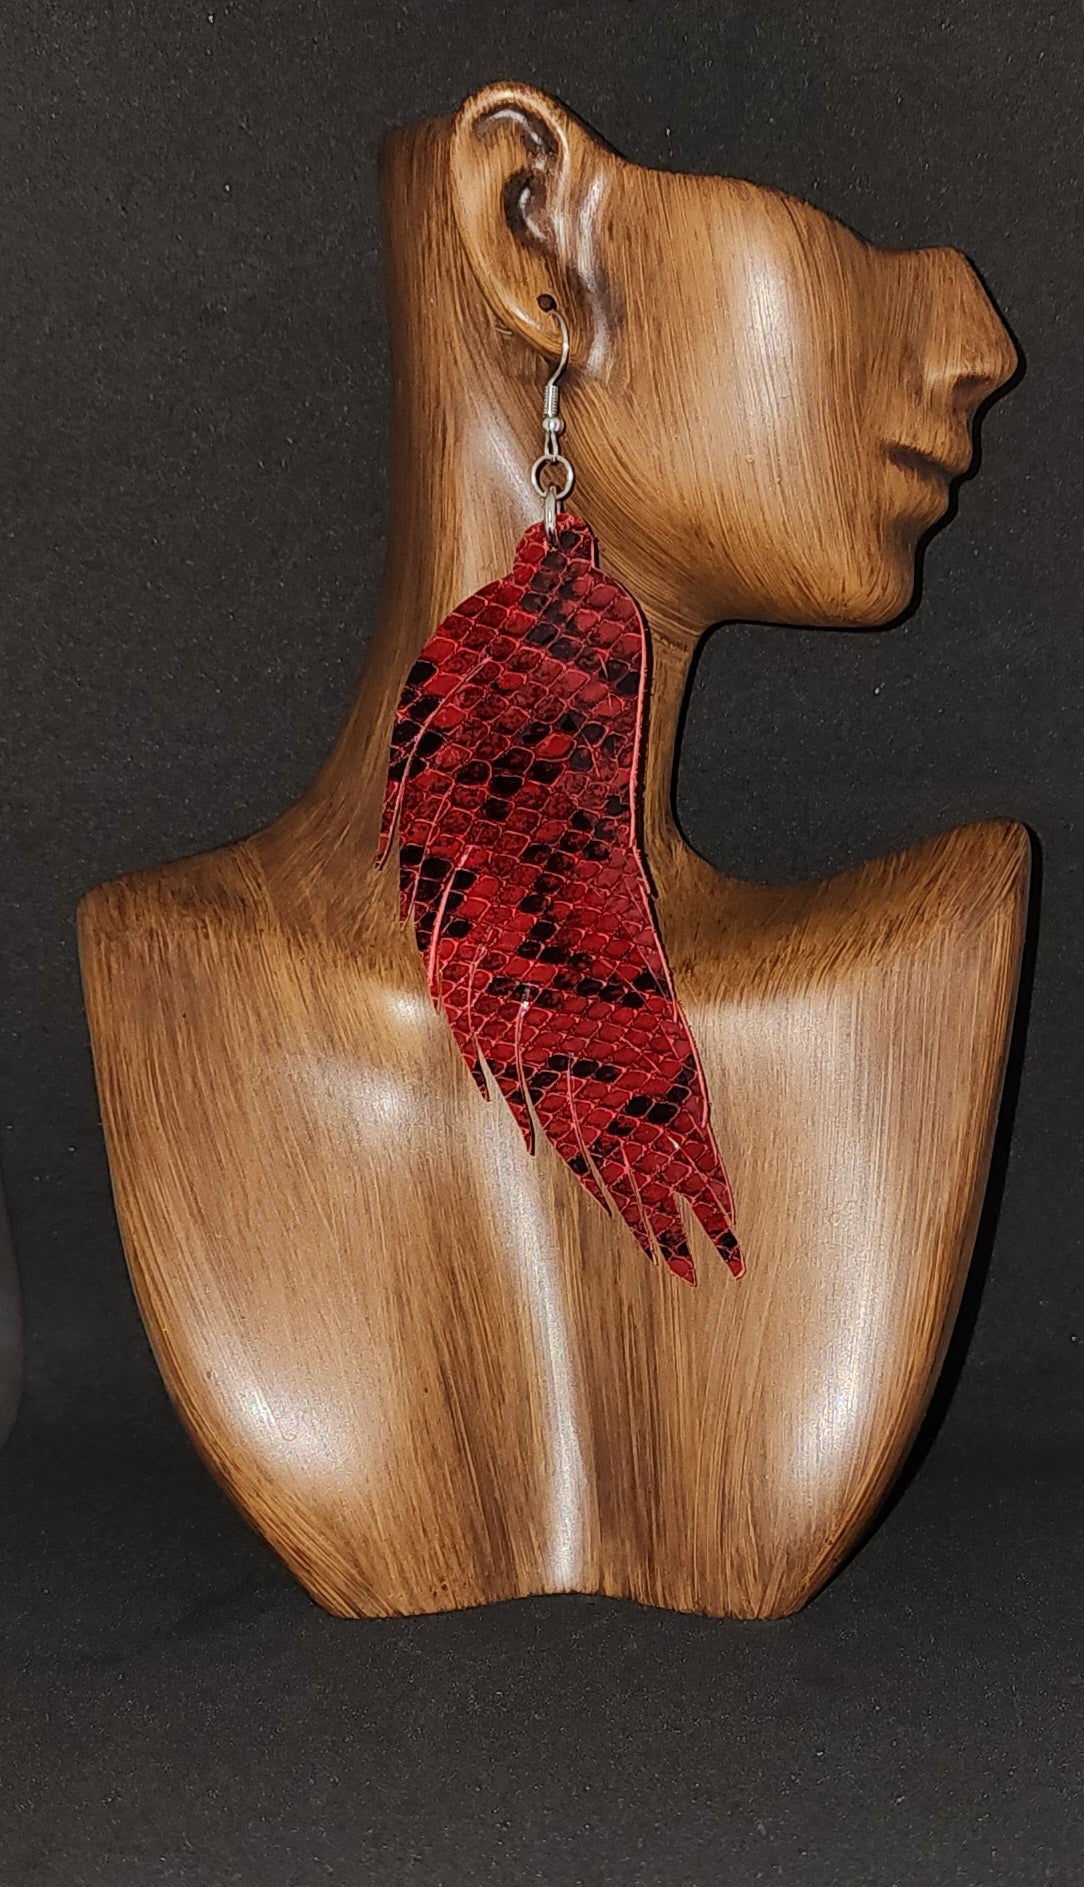 Red Snake Skin Geniune Leather Feathers